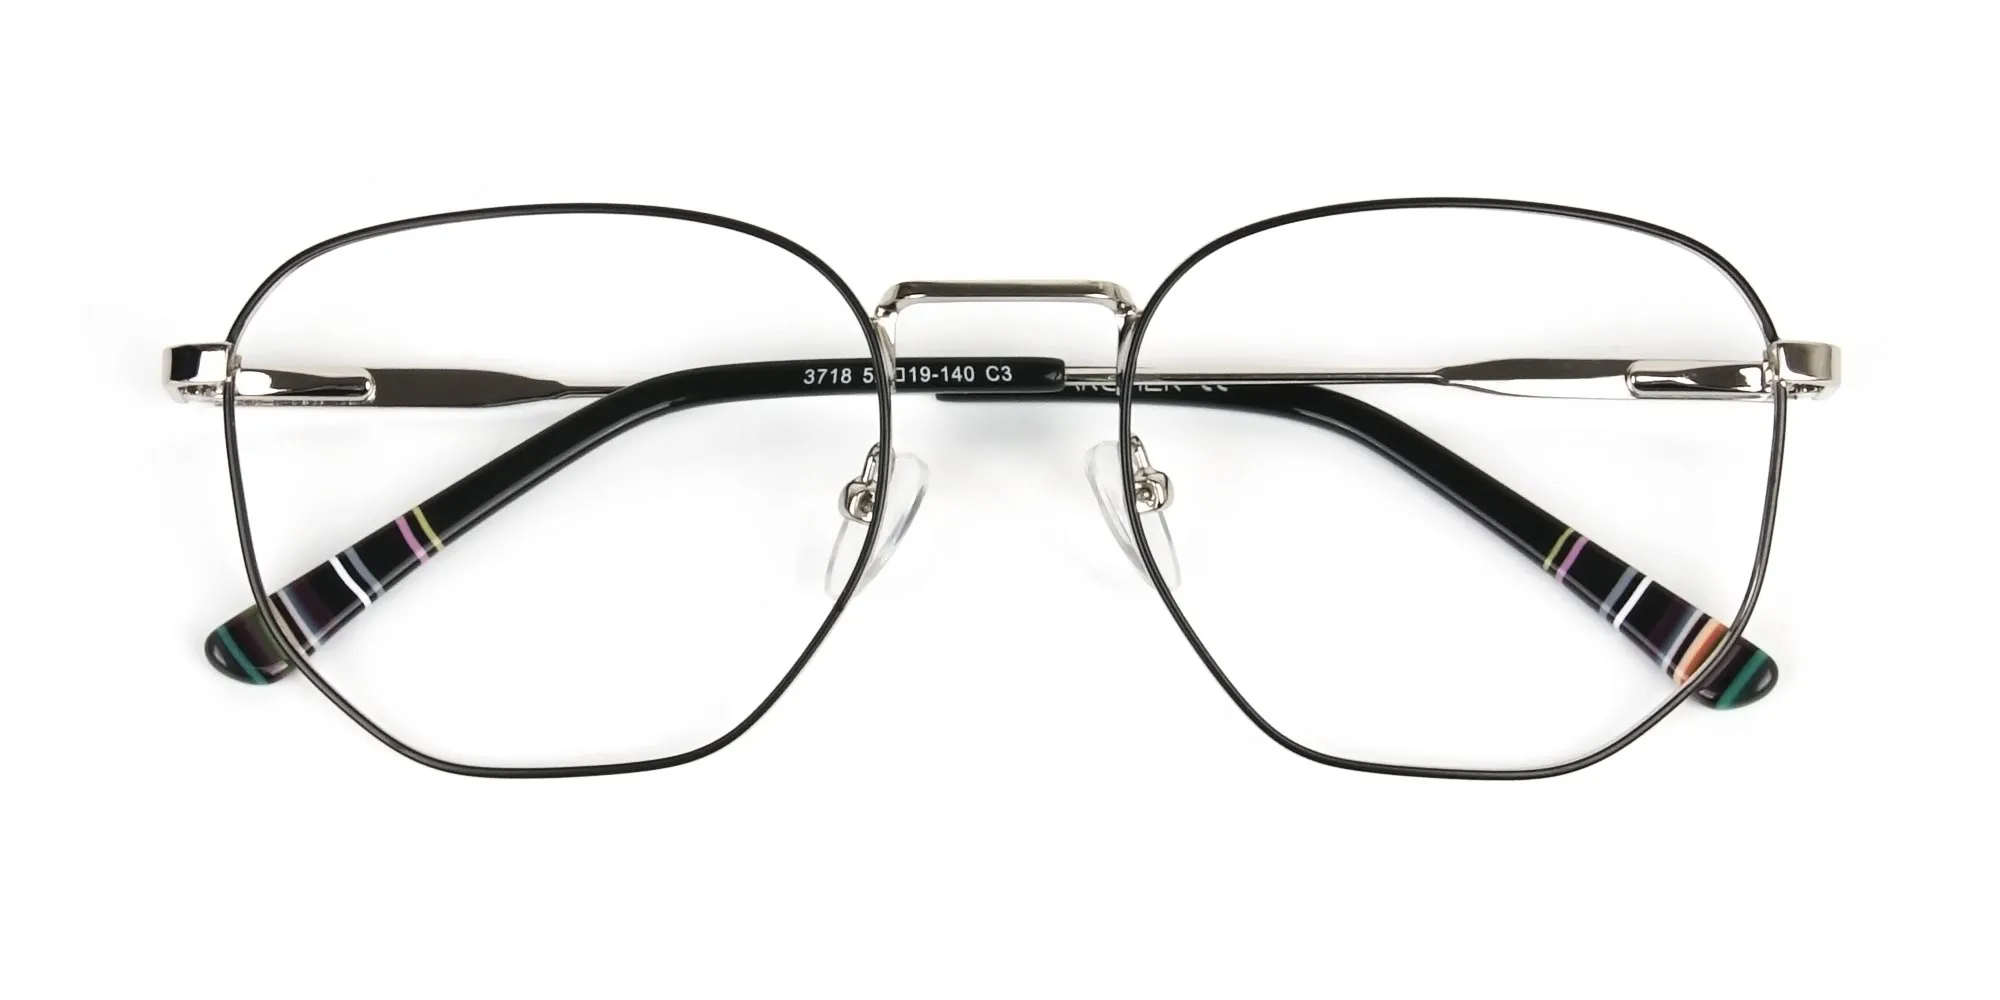 Geometric Black & Silver Spectacles - 3